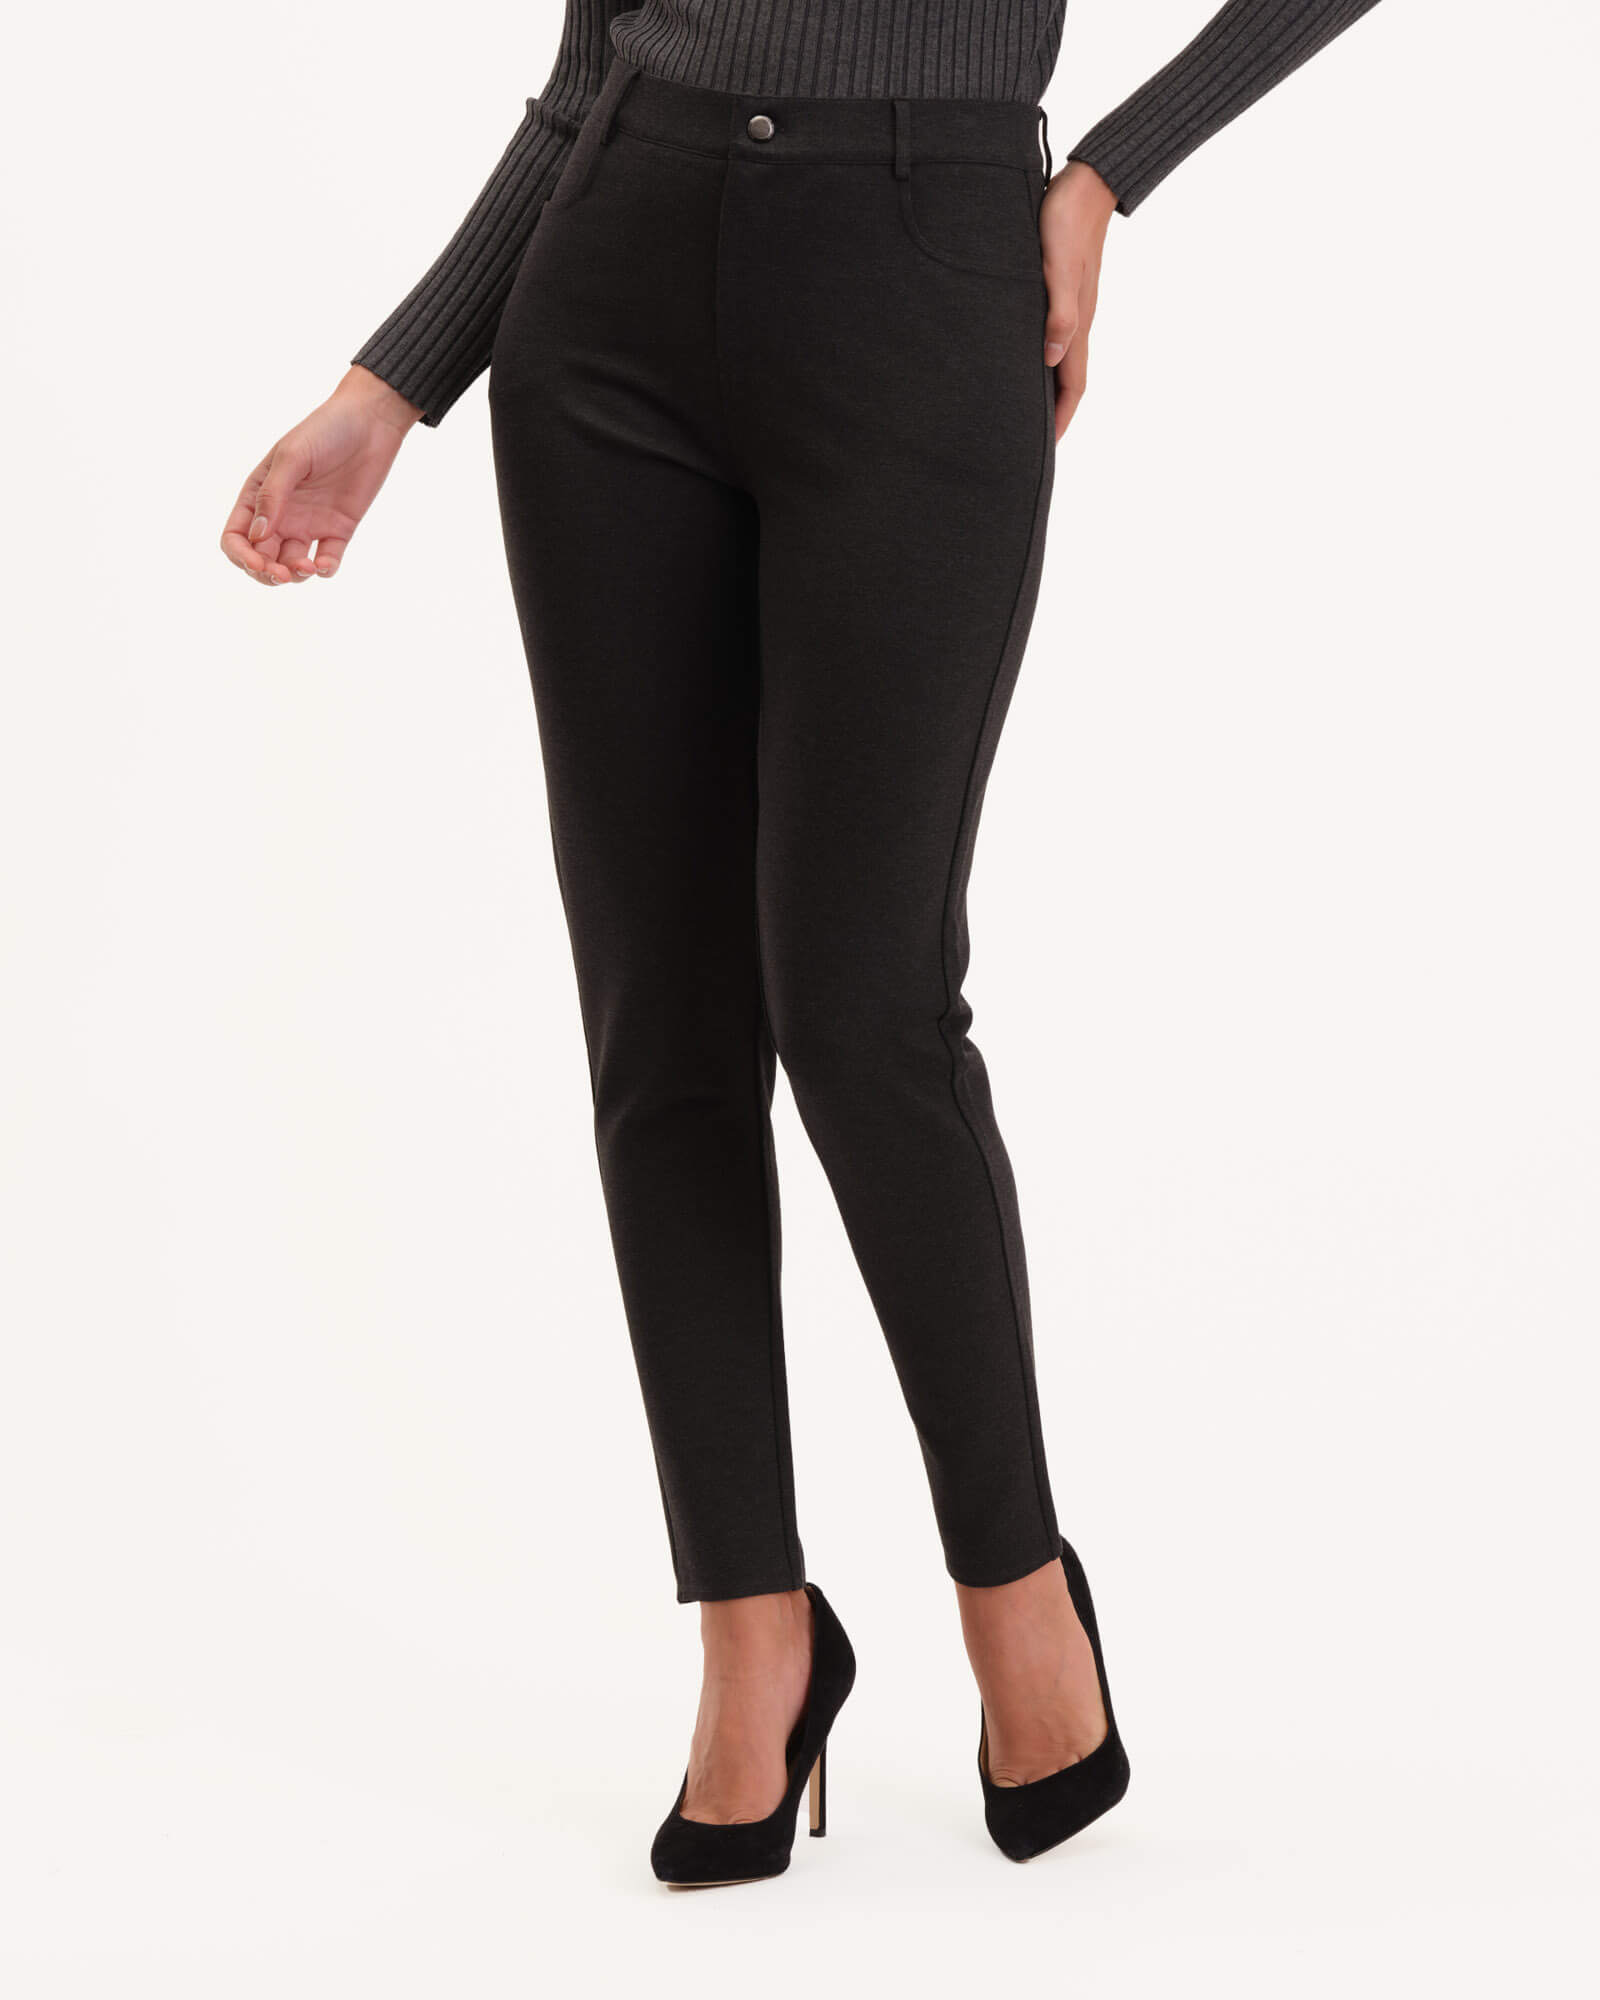 Pants With Matching Belt Casual Formal Office Trousers For Ladies - Black -  Wholesale Womens Clothing Vendors For Boutiques